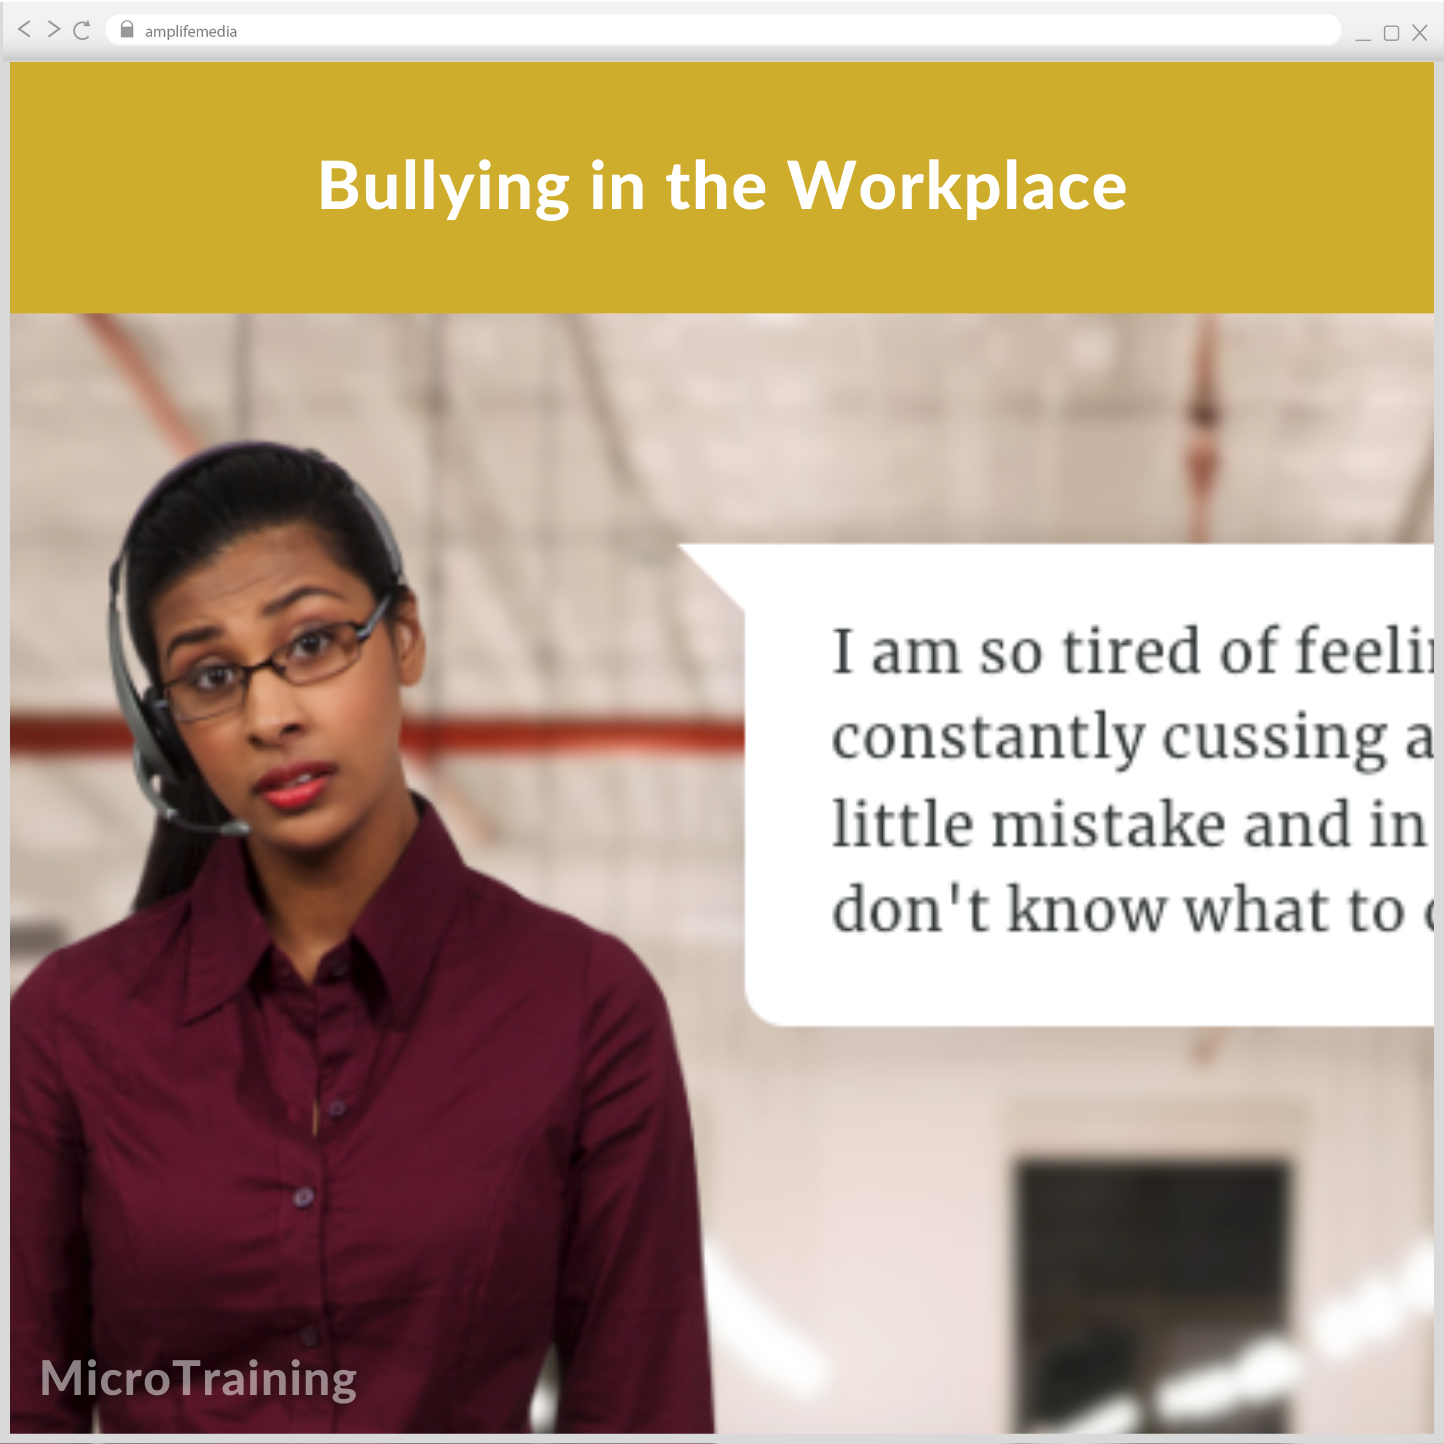 Subscription to Wellbeing Media: Bullying in the Workplace MT 521